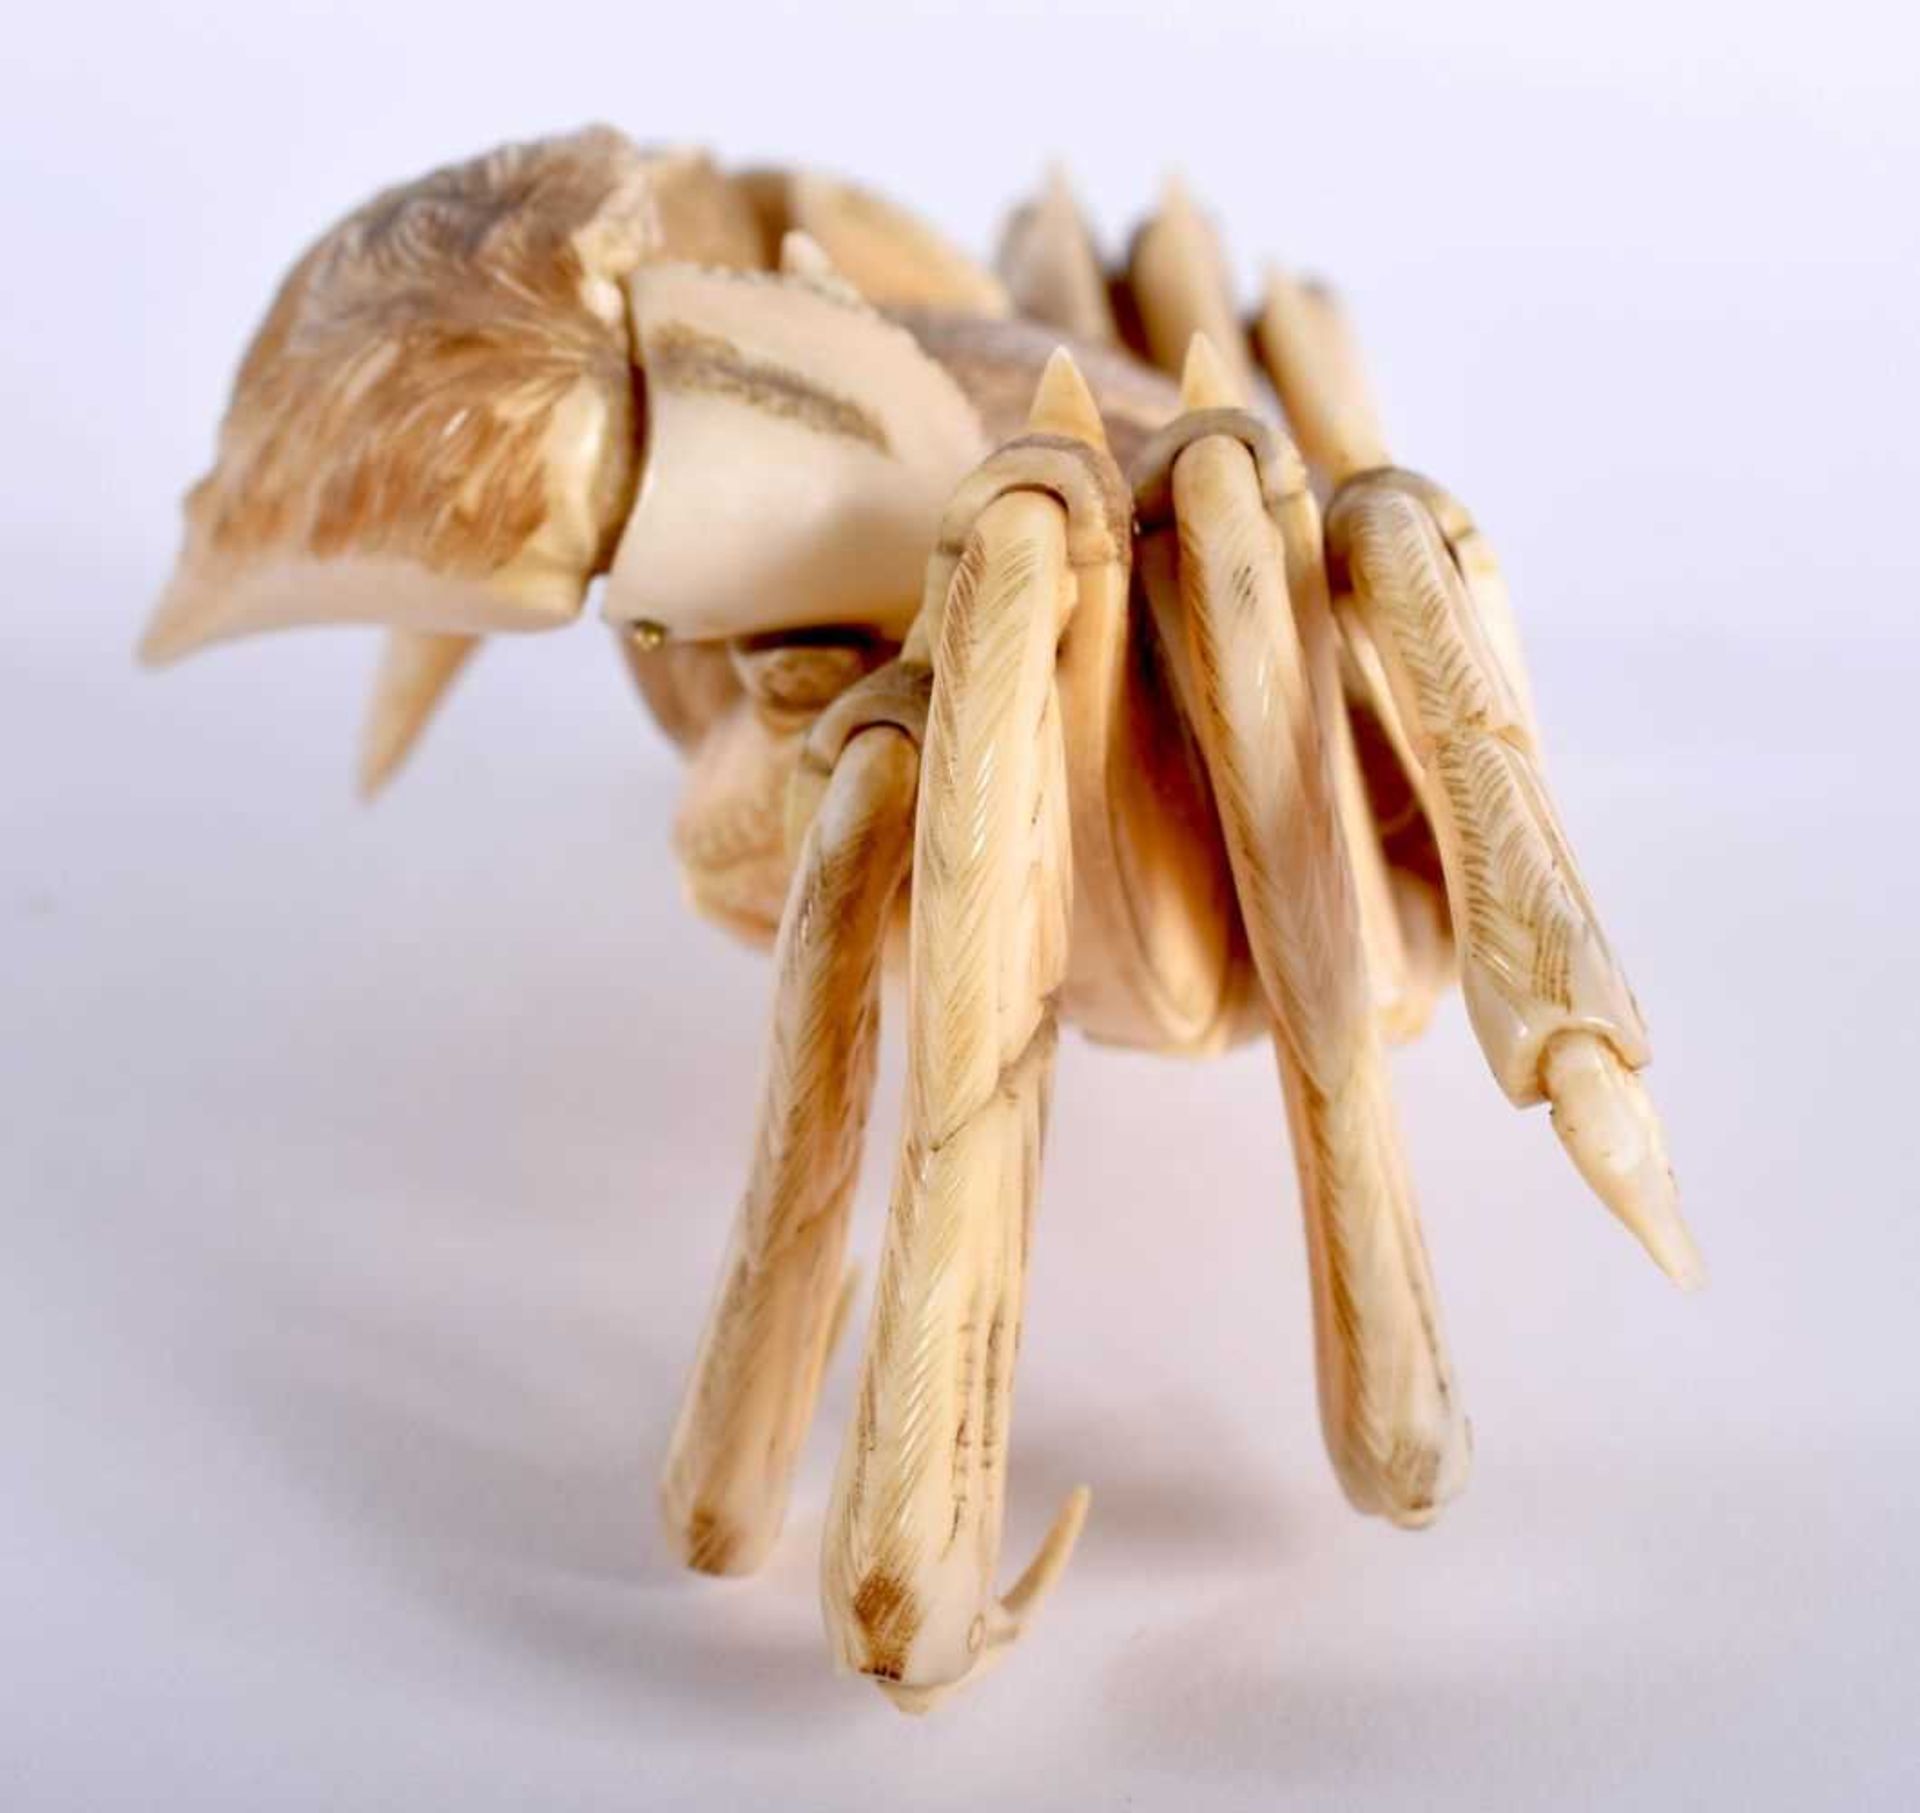 A FINE 19TH CENTURY JAPANESE MEIJI PERIOD FULLY ARTICULATED BONE JIZAI OKIMONO CRAB with fully - Image 2 of 6